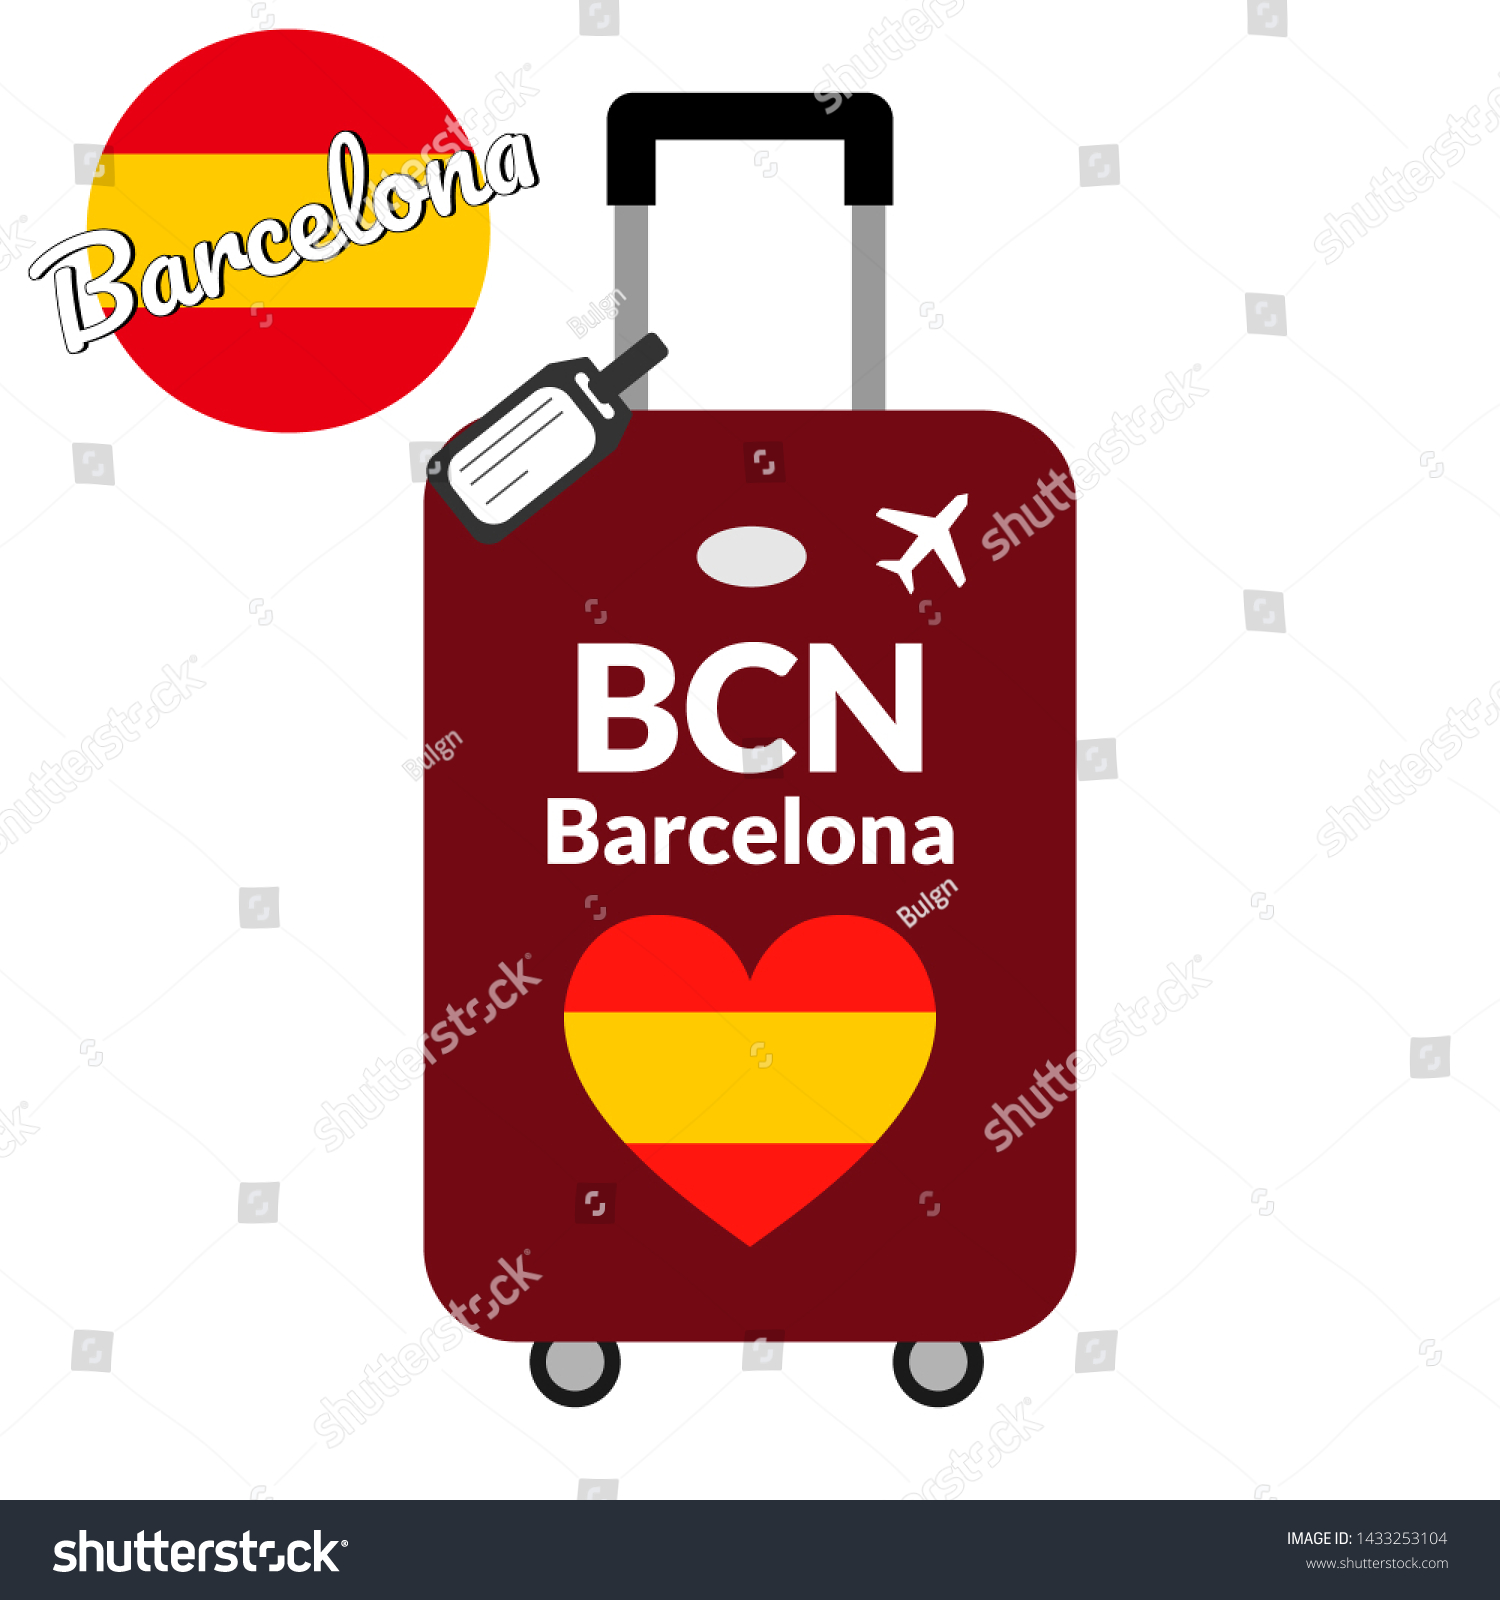 SVG of Luggage with airport station code IATA or location identifier and destination city name Barcelona, BCN. Travel to Spain, Europe concept. Heart shaped flag of the Spain on baggage svg